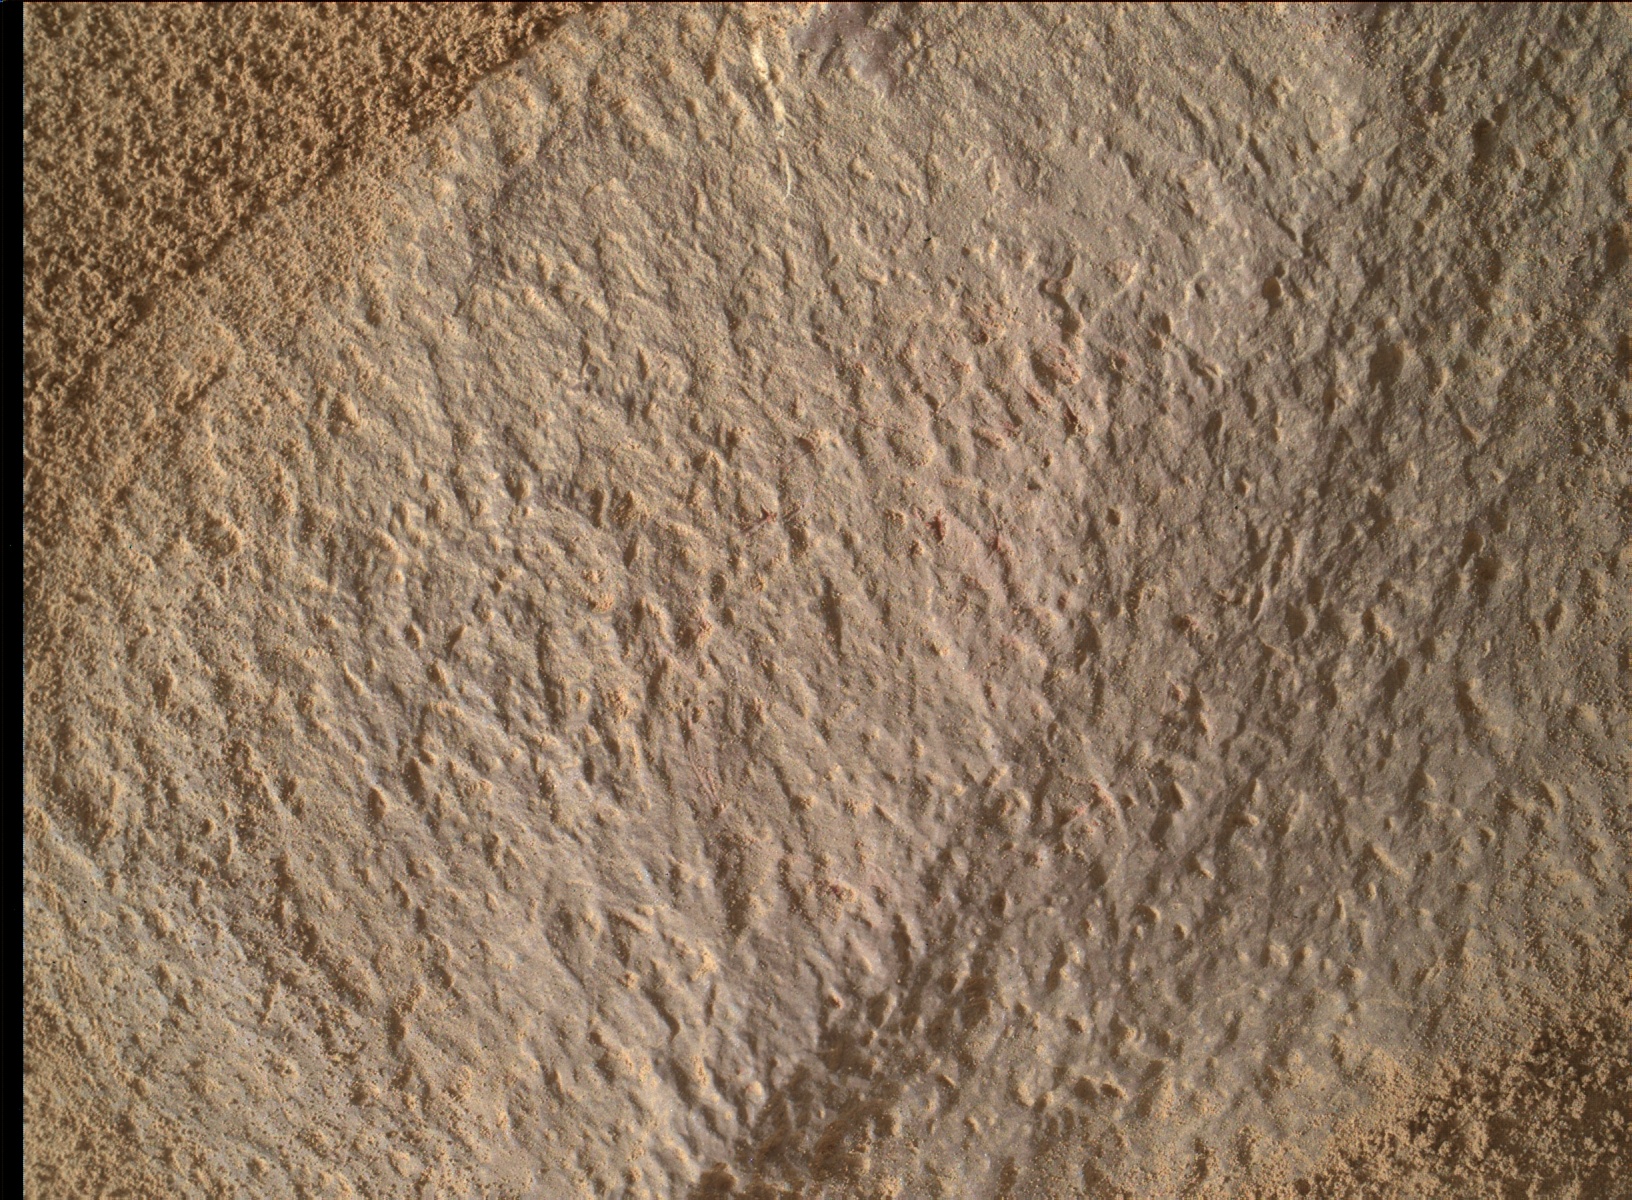 Nasa's Mars rover Curiosity acquired this image using its Mars Hand Lens Imager (MAHLI) on Sol 1380